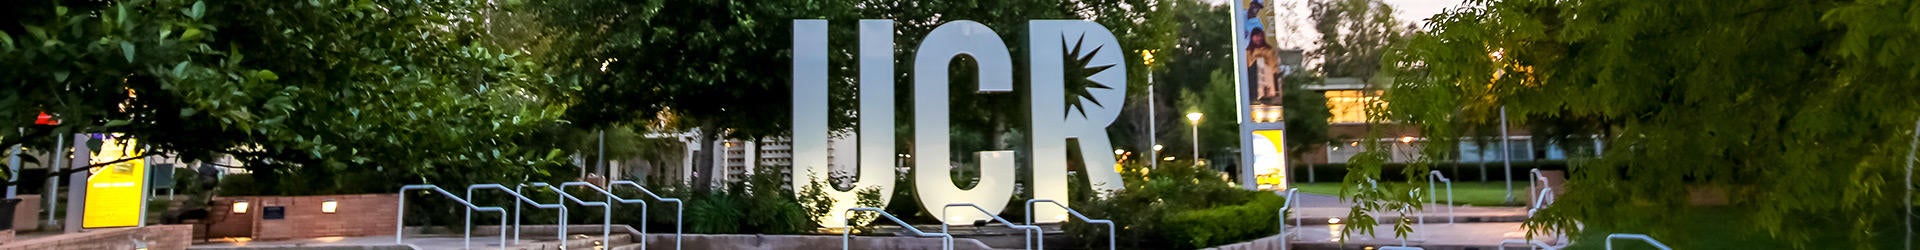 Panoramic view of large iconic metallic UCR logo sculpture that is surrounded by green grass.